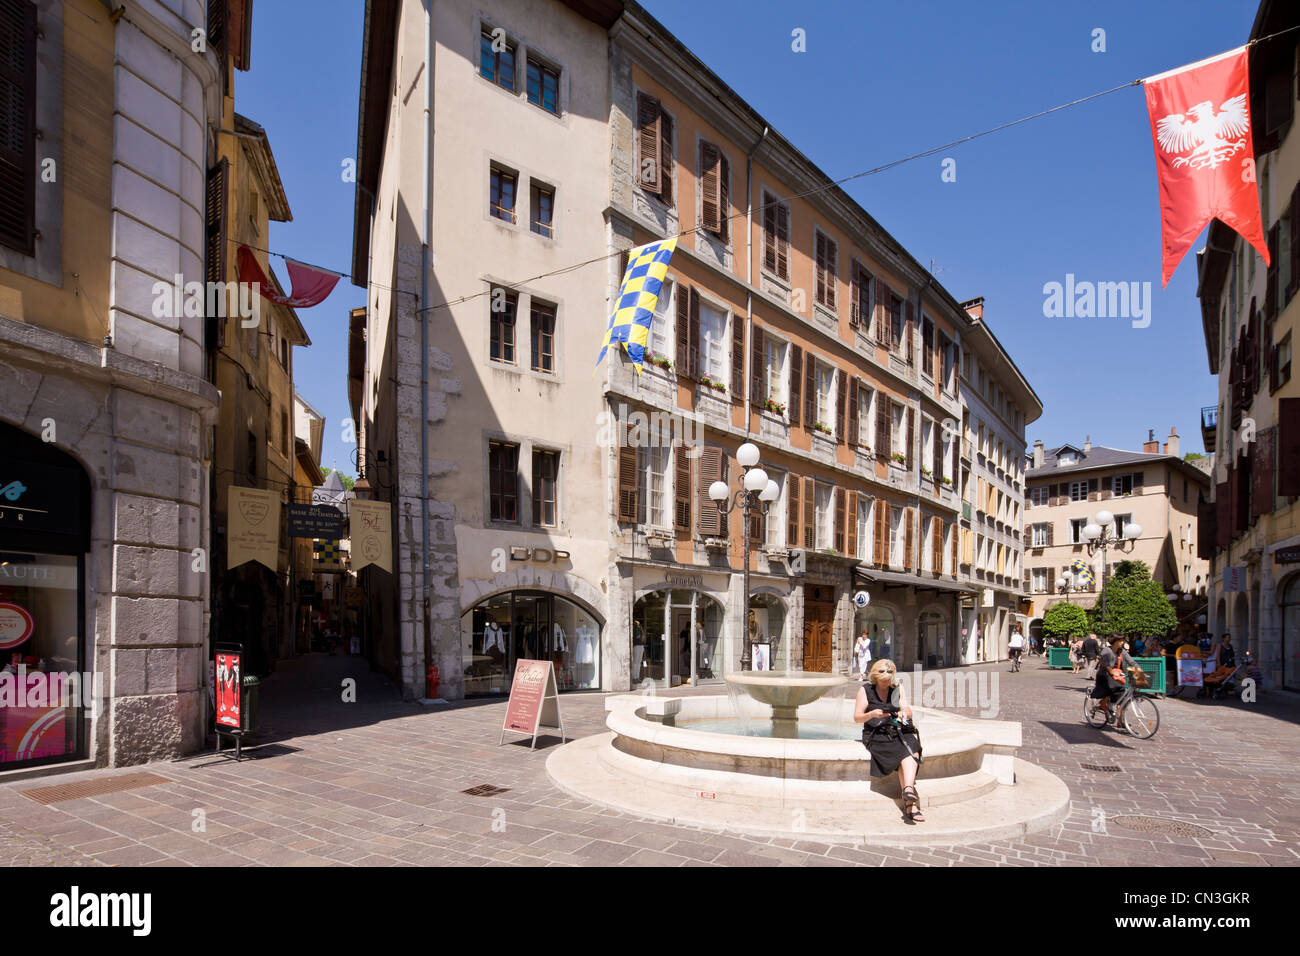 France, Savoie, Chambery, old town, fountain in Place St Leger Stock Photo